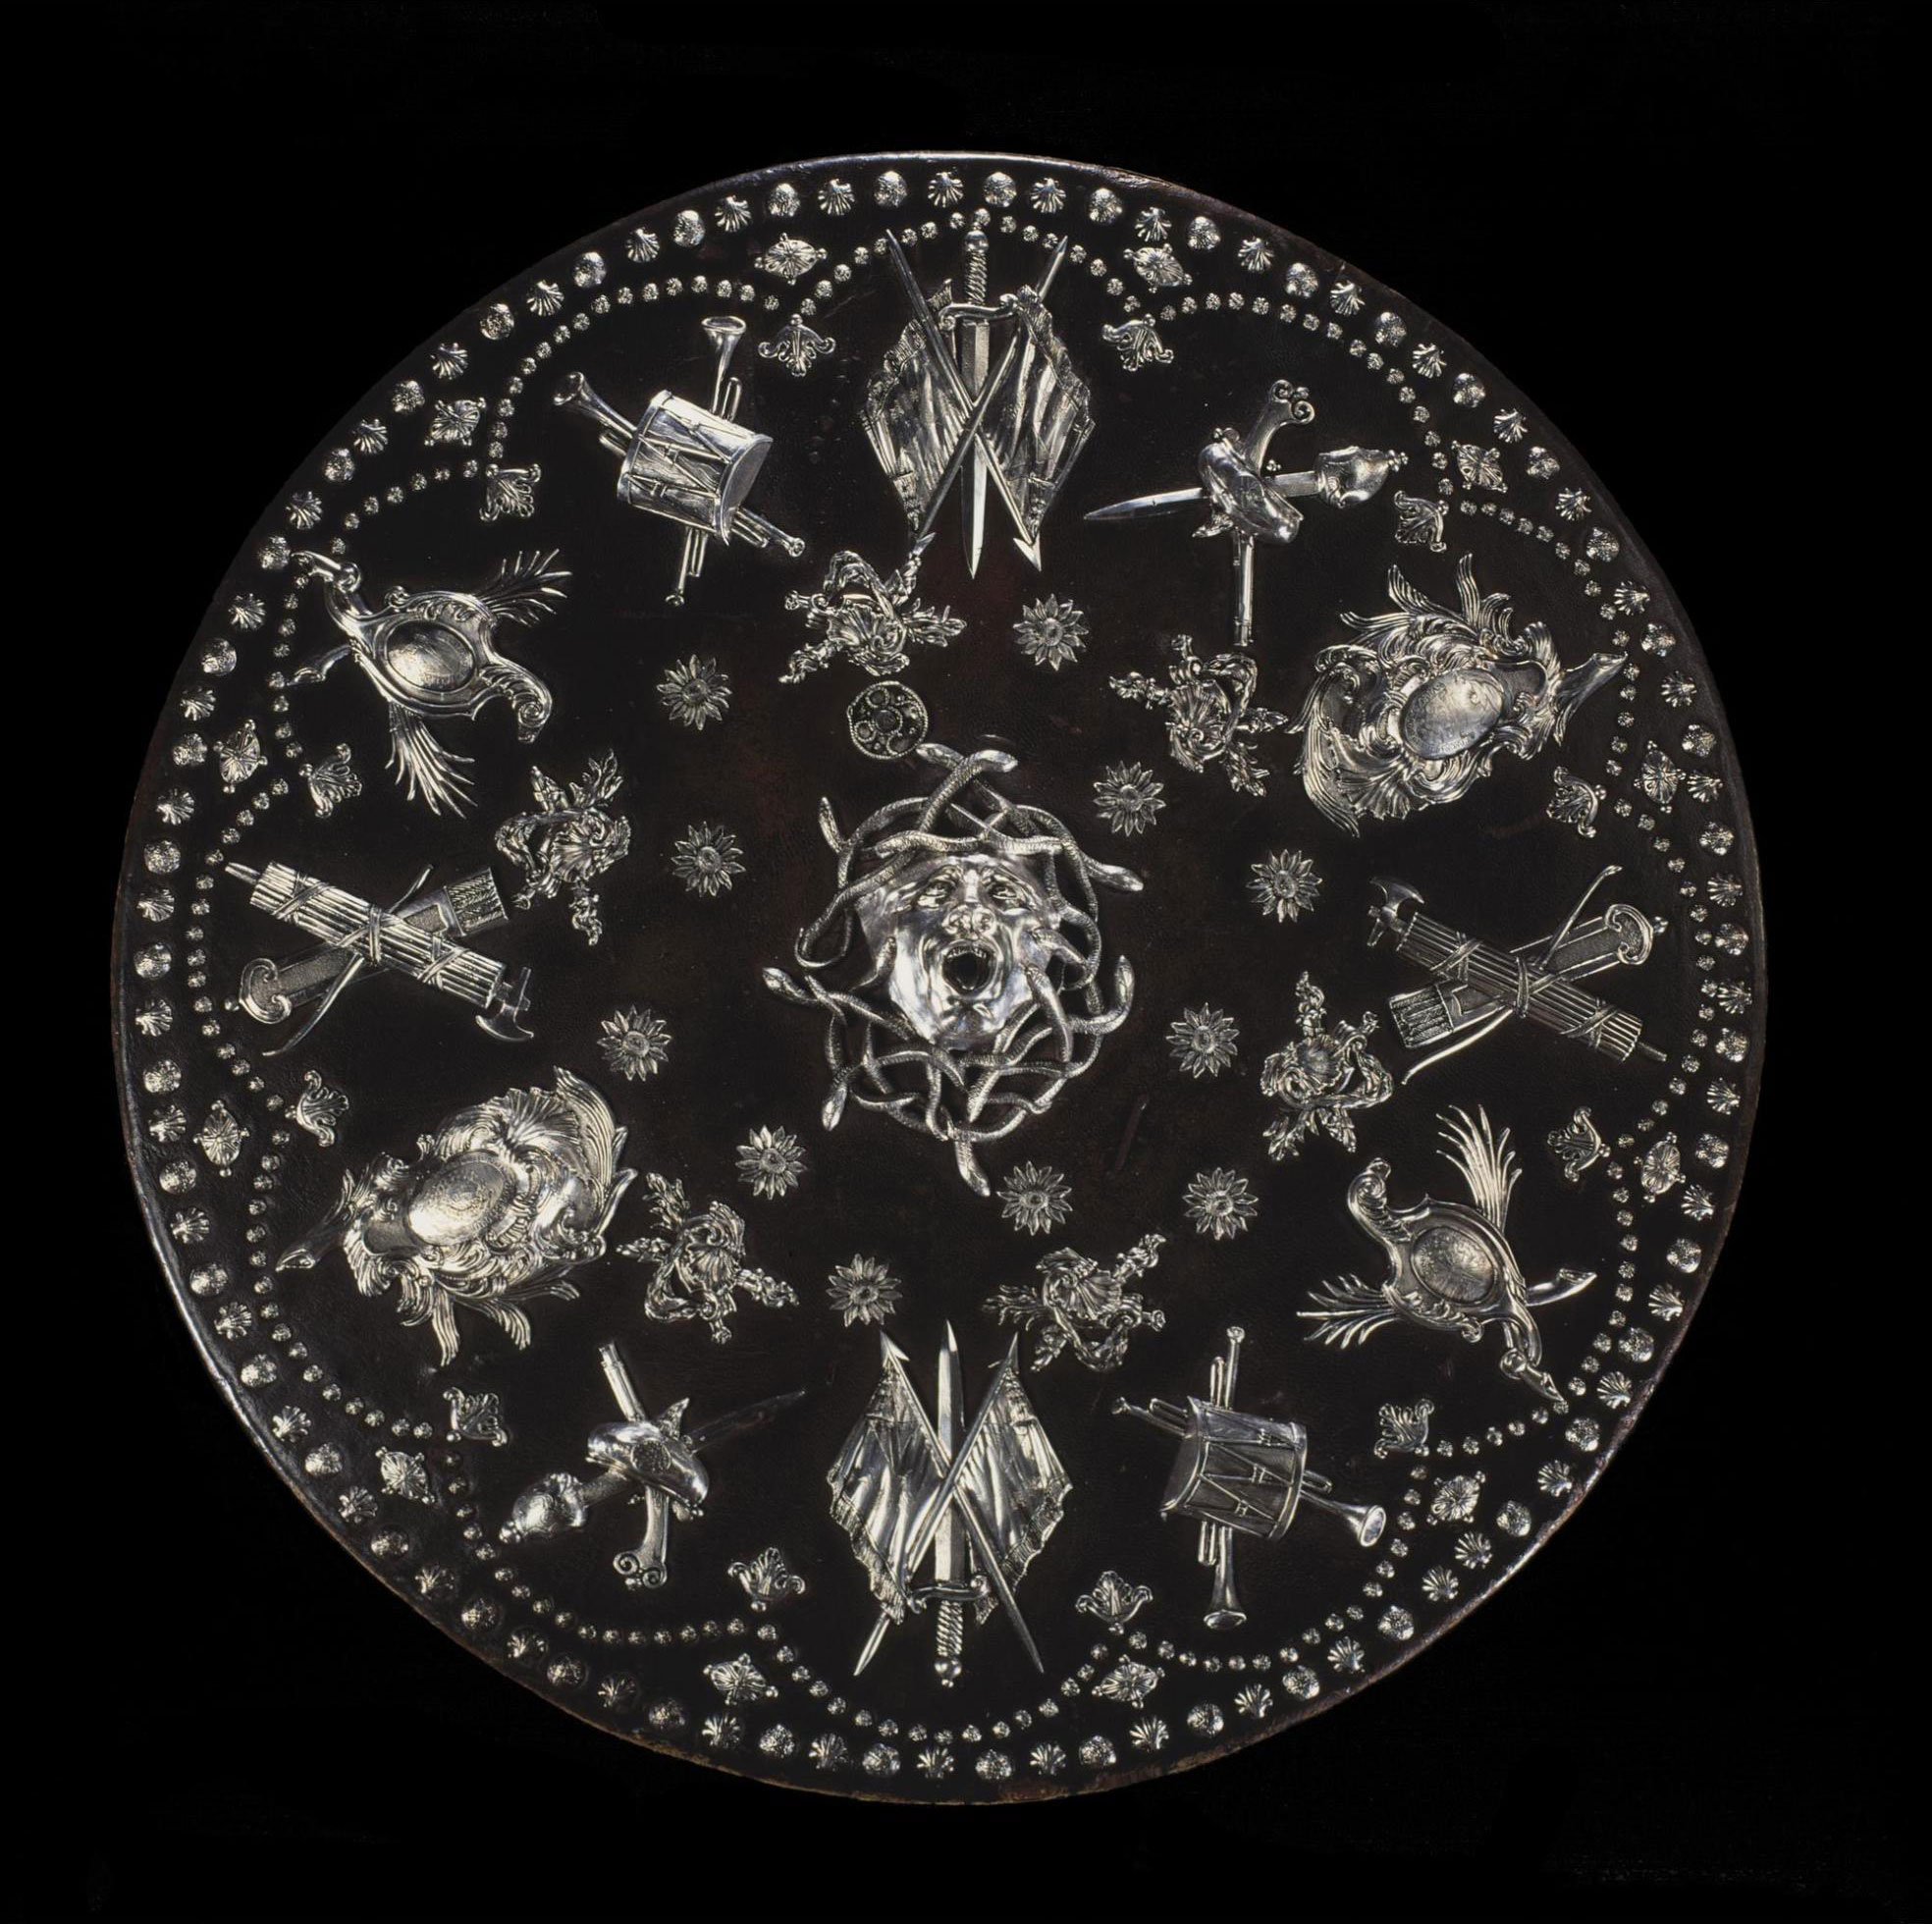 This targe, or shield, was presented to Prince Charles before Culloden, but abandoned when the Prince fled the field after the Jacobites were defeated.